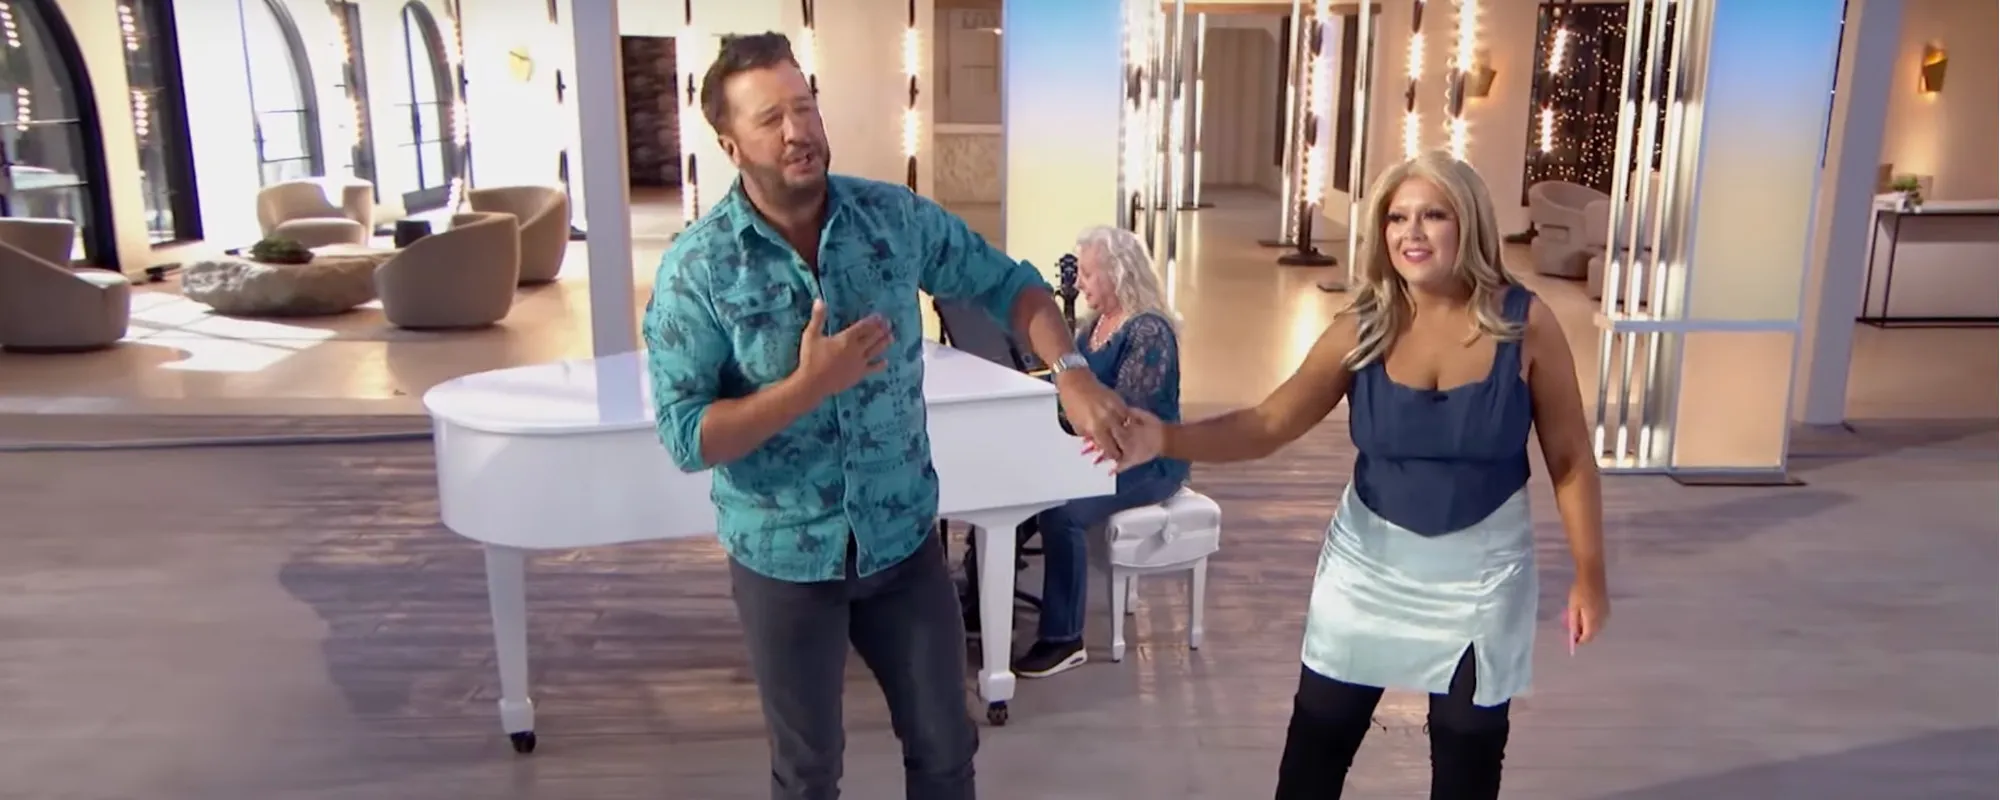 Watch Luke Bryan Spontaneously Performs Country Classic During ‘American Idol’ Audition